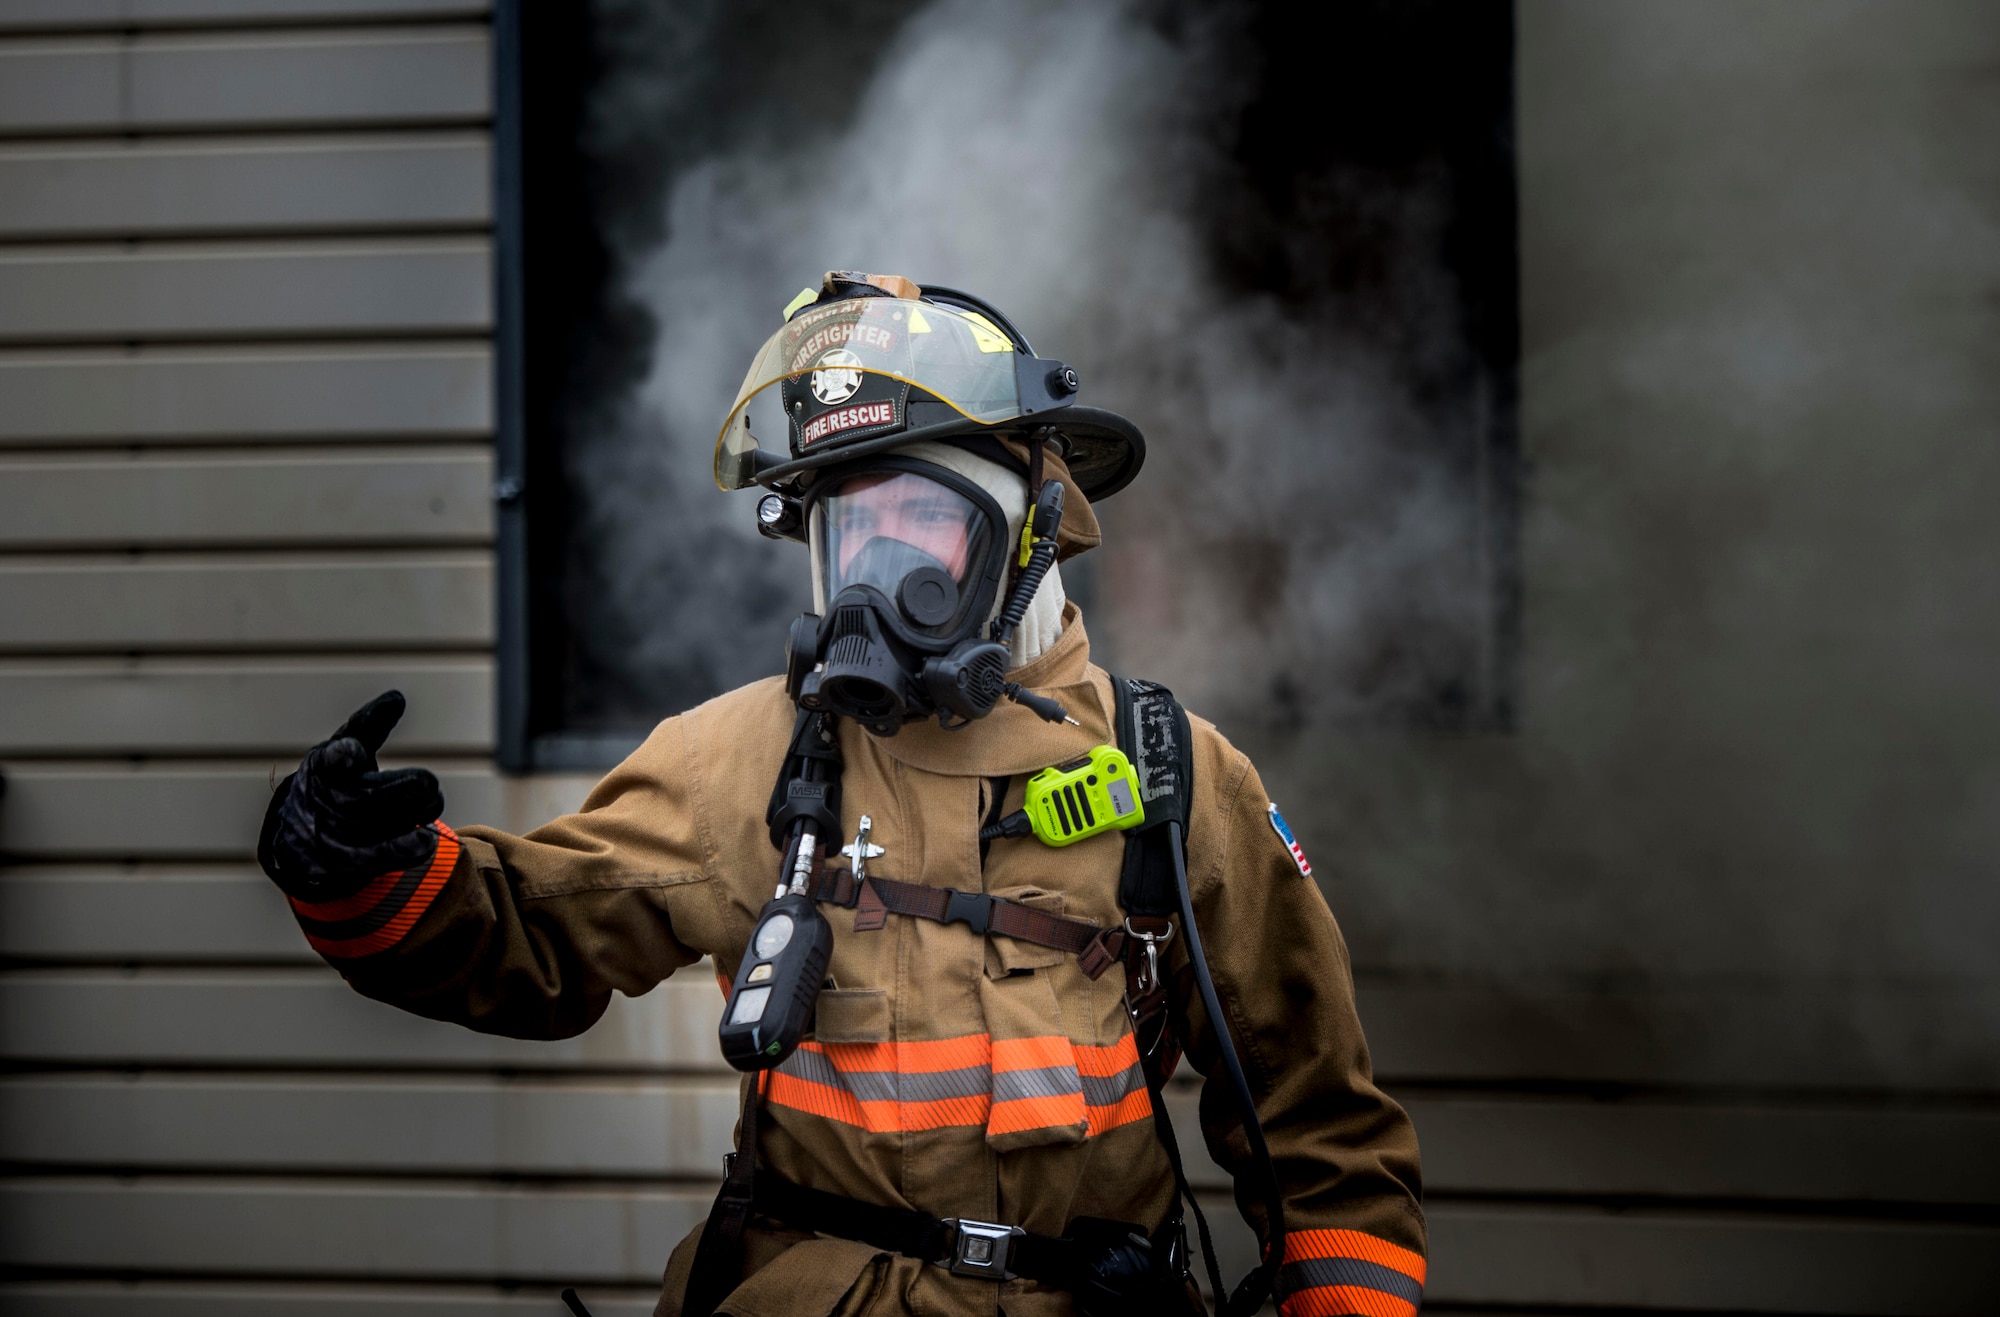 U.S. Air Force Airman 1st Class Austin Perry, 20th Civil Engineer Squadron, firefighter signals a fellow firefighter at Shaw Air Force Base, S.C., Nov. 20, 2018.